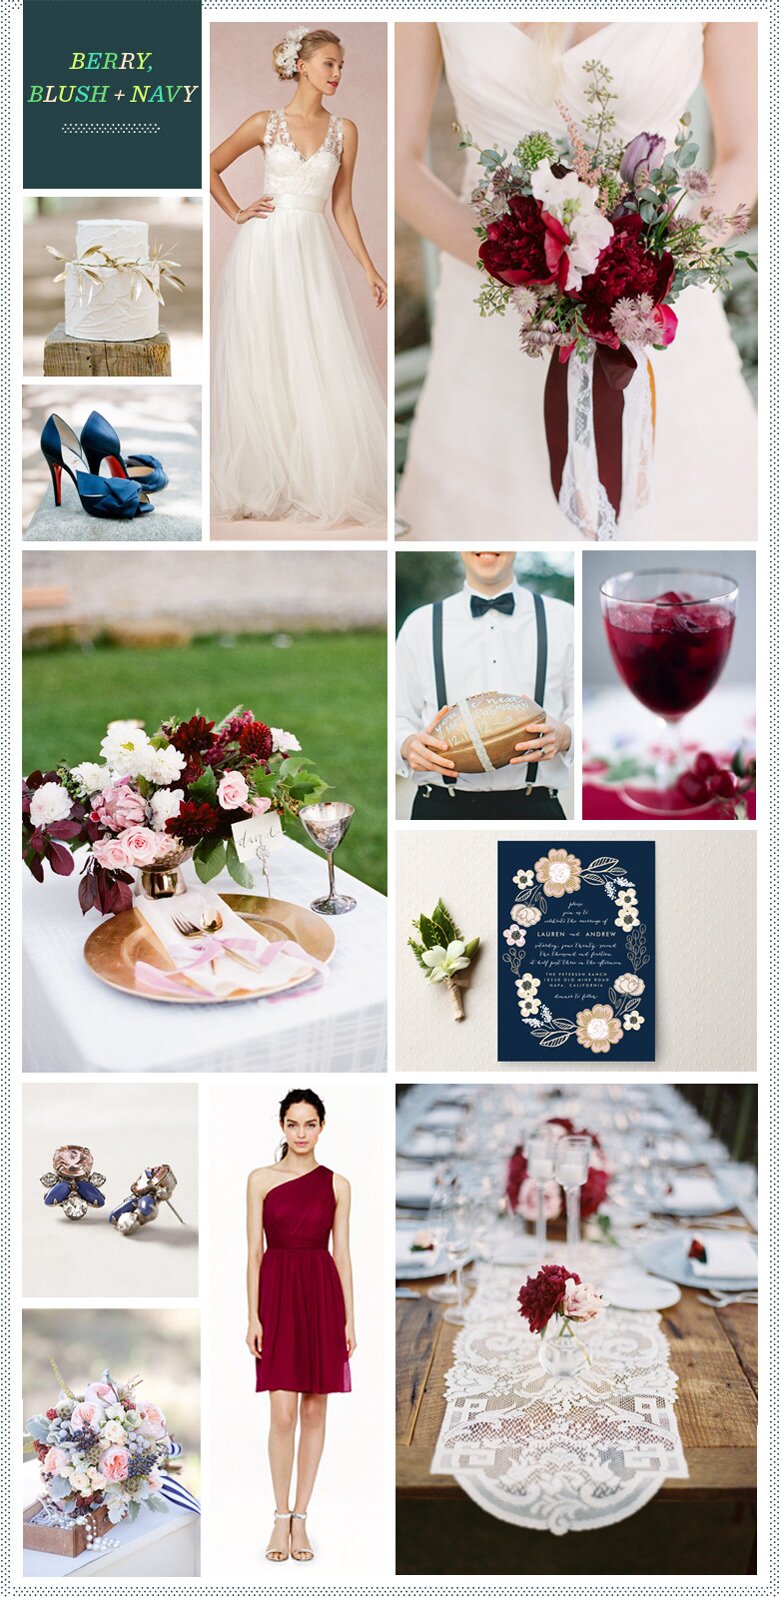 REVEL By Request: Berry, Blush + Navy